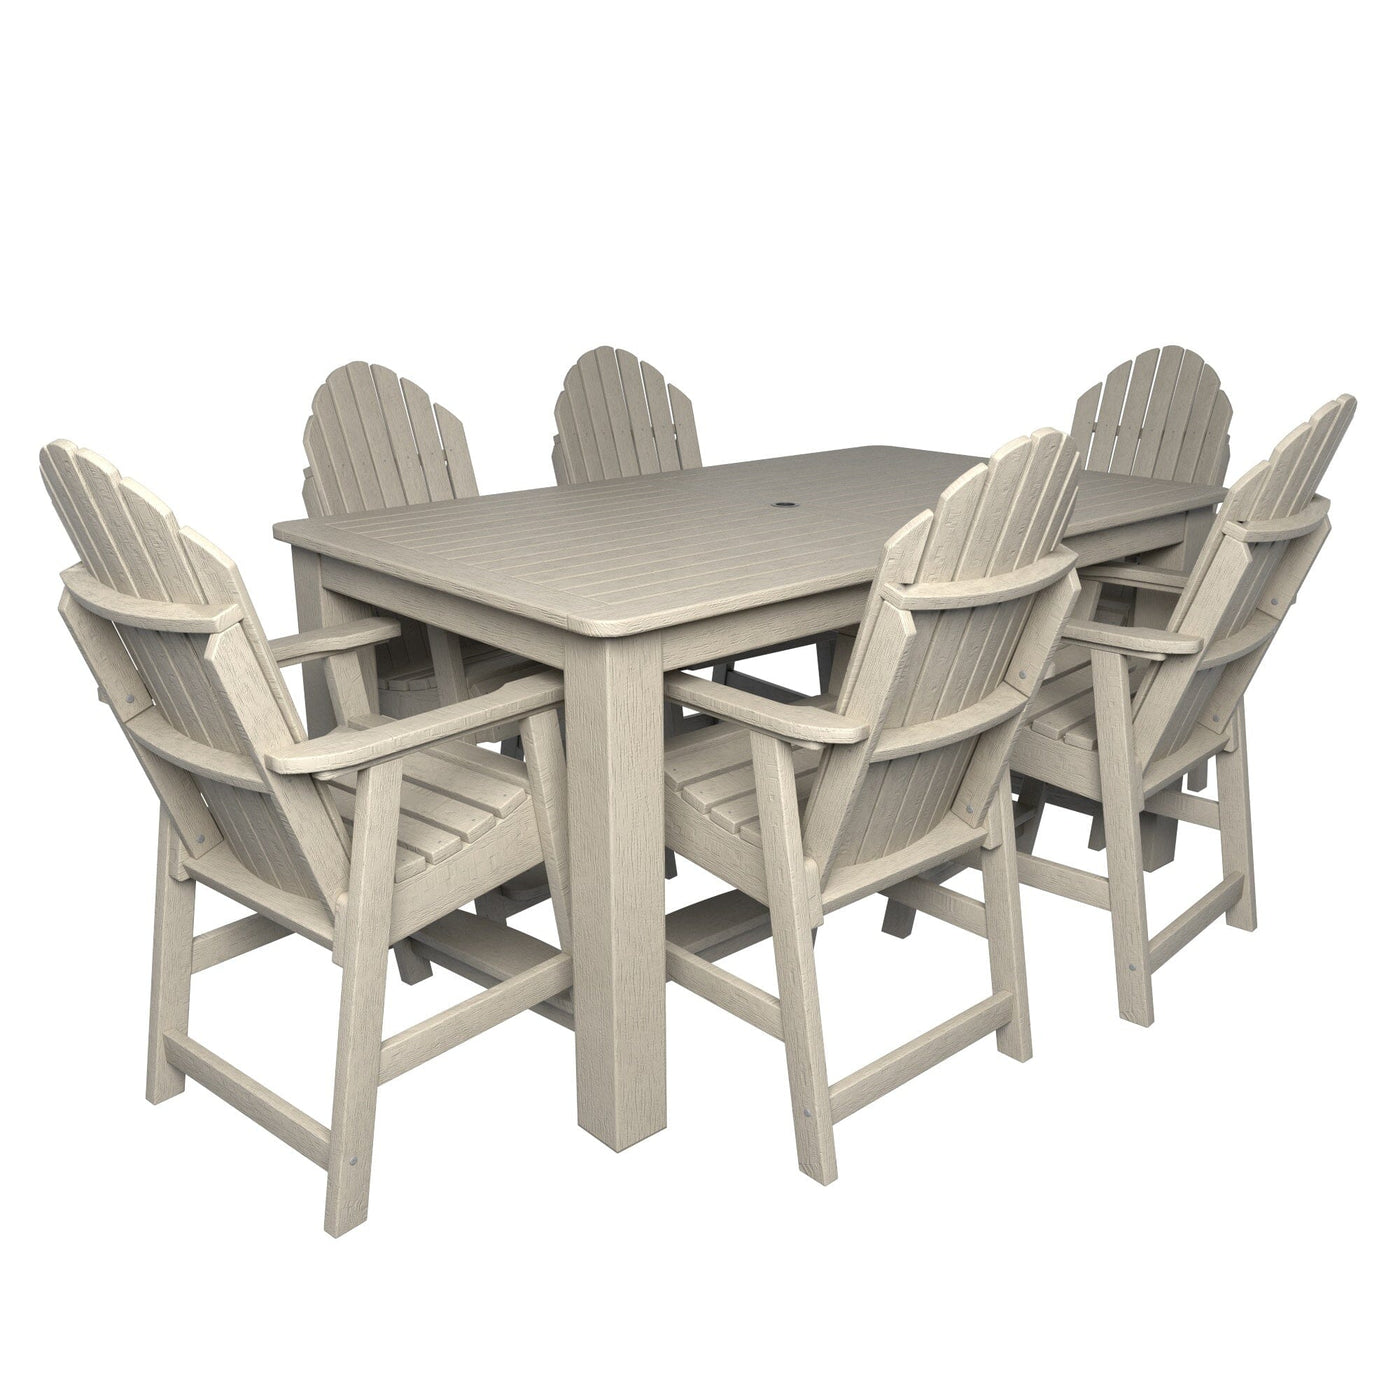 Hamilton 7pc Rectangular Outdoor Dining Set 42in x 72in - Counter Height Dining Highwood USA Whitewash 